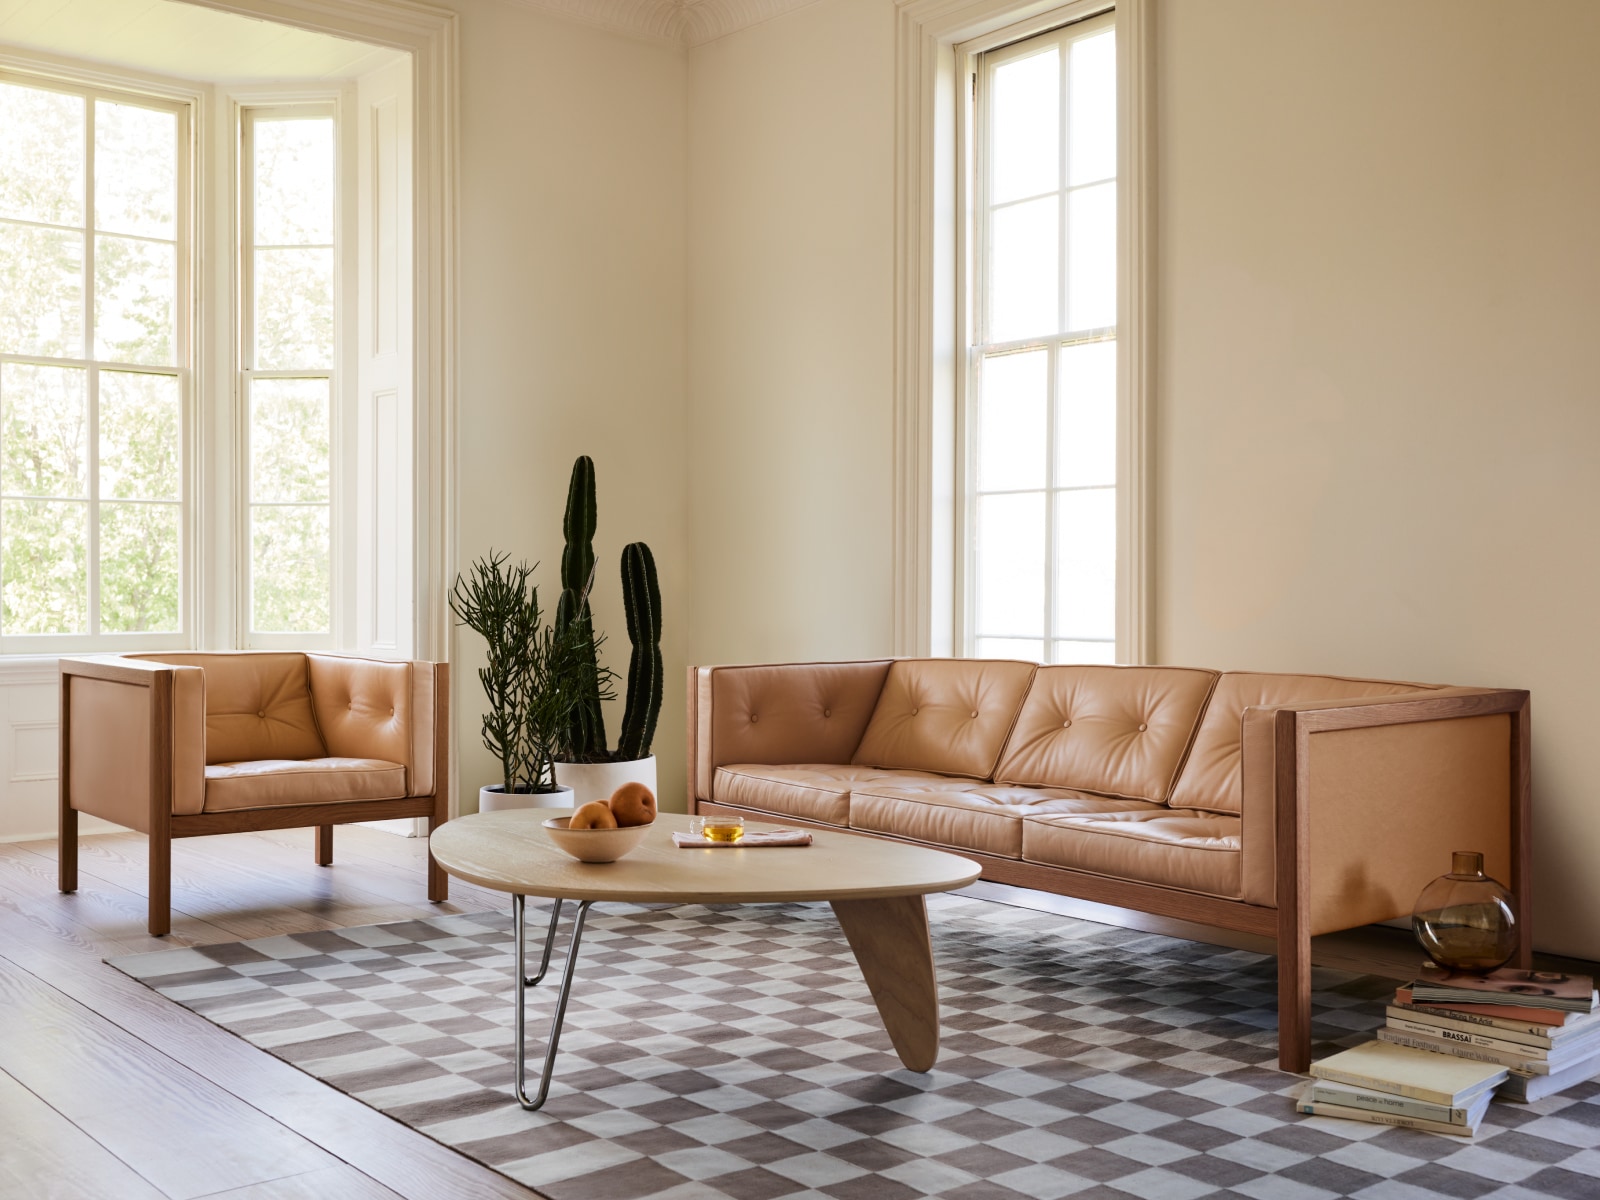 A Noguchi Rudder Table, Girard Check Rug, 80-inch Cube Sofa and Cube Armchair in a living room setting.